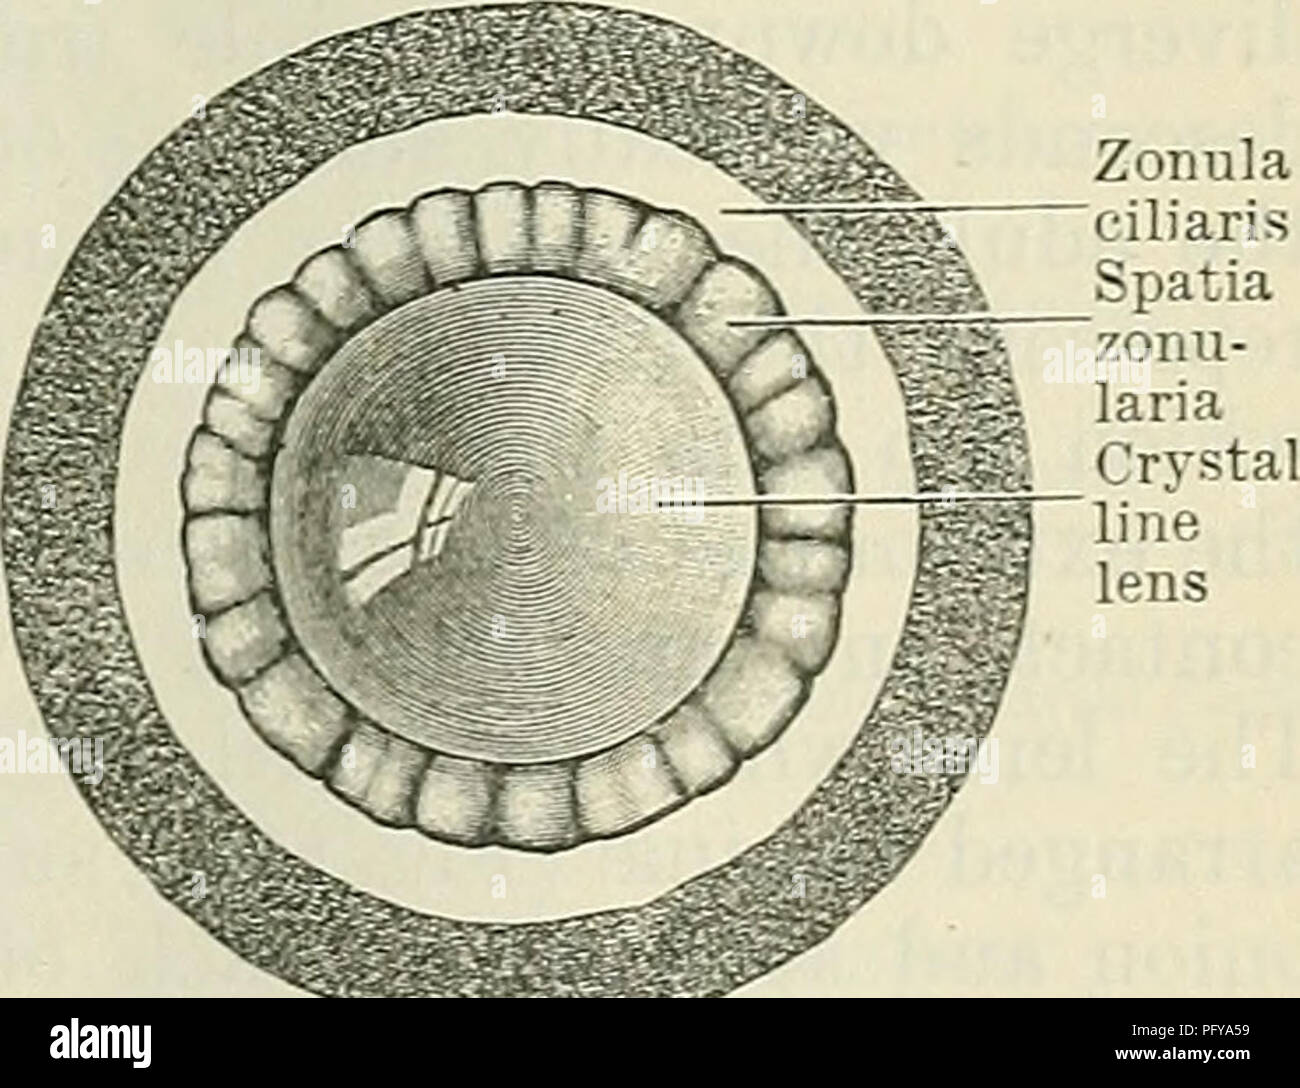 . Cunningham's Text-book of anatomy. Anatomy. EEFBACTING- MEDIA OF THE EYE. 819 EEFEACTING MEDIA. Corpus Vitreum.—The vitreous body is a transparent, jelly-like substance situated between the crystalline lens and the retina, and occupying the posterior four-fifths of the bulb of the eye (Fig. 677). In front it presents a deep concavity, the hyaloid fossa (O.T. fossa patellaris), for the reception of the posterior convexity of the lens. It is enclosed within a thin transparent membrane, the membrana hyaloidea, which is in contact with the membrana limitans interna of the retina, and is adherent Stock Photo